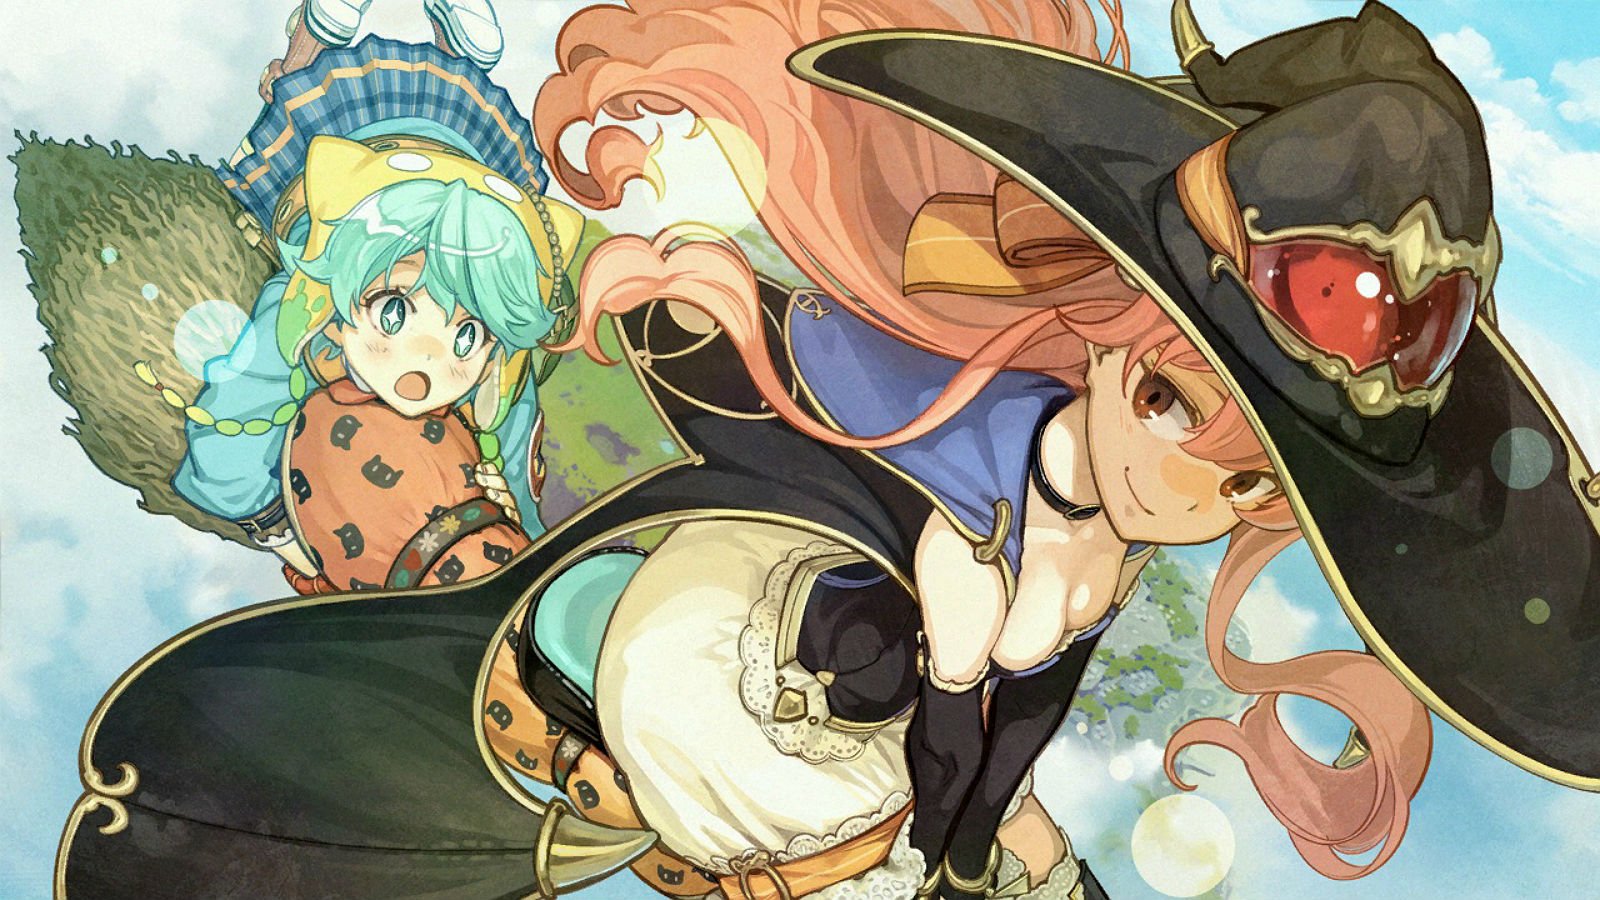 atelier, Shallie alchemists, Of, The, Dusk, Sea, Game, Cg, Shallotte, Elminus, Wilbell, Voll, Erslied, Bf Wallpaper